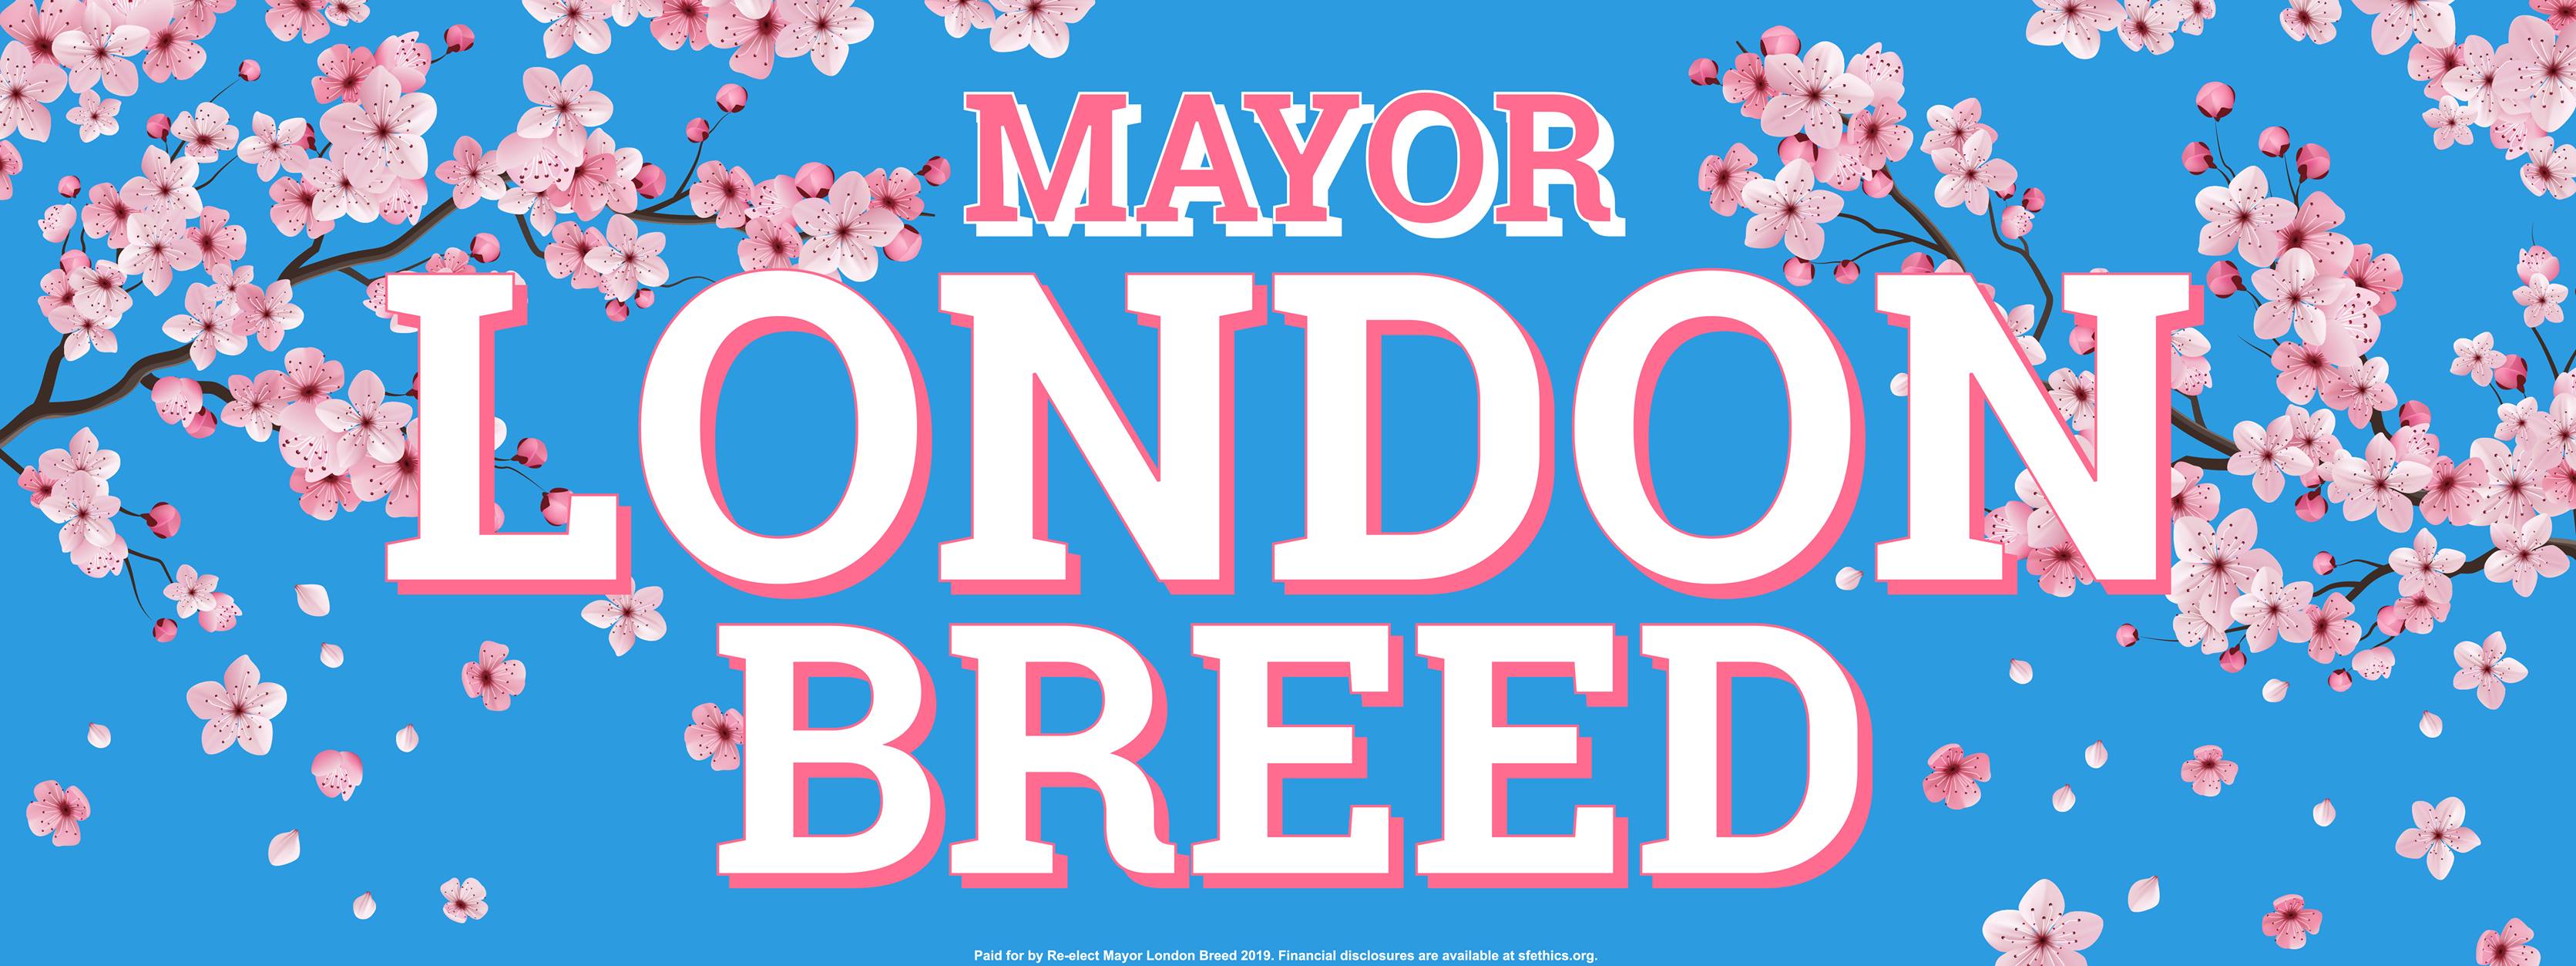 4/21: Join Mayor London Breed in the Cherry Blossom Festival Parade